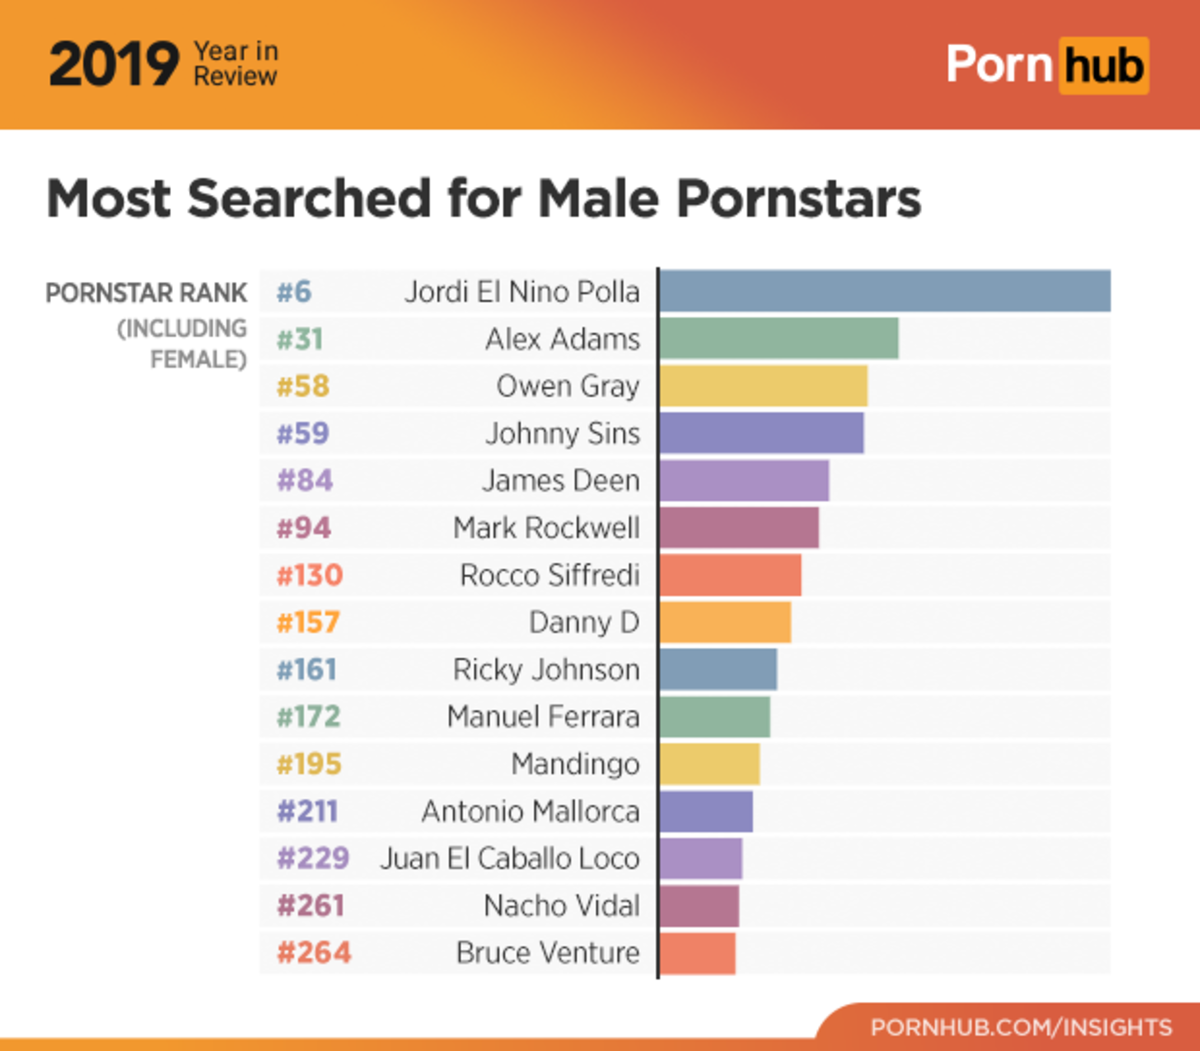 1-pornhub-insights-2019-year-review-most-search-male-pornstars-1